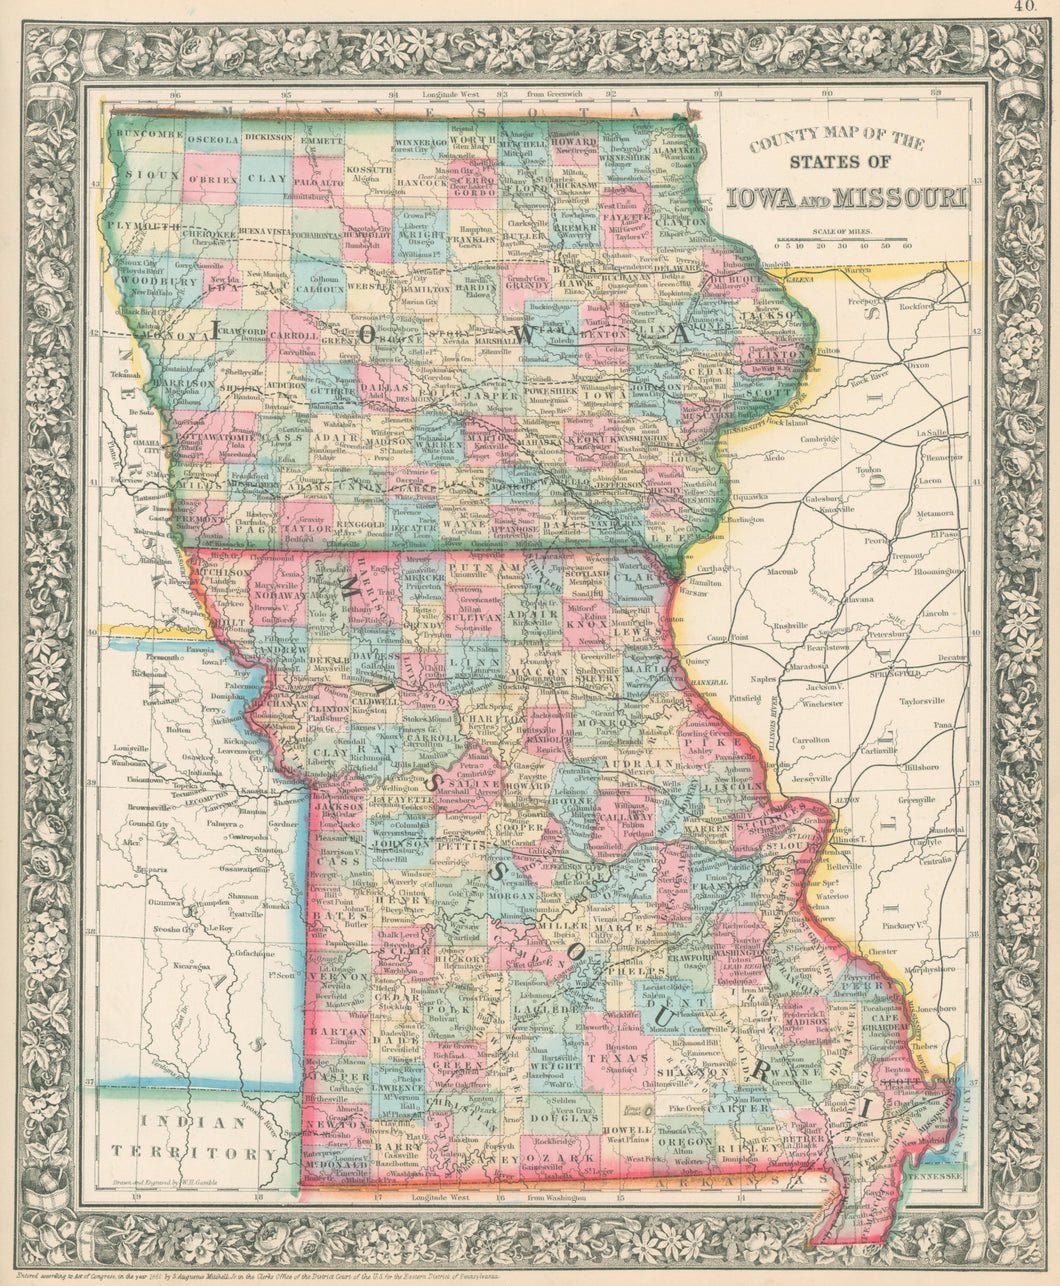 Mitchell, S. Augustus “County Map of the the States of Iowa and Missouri”